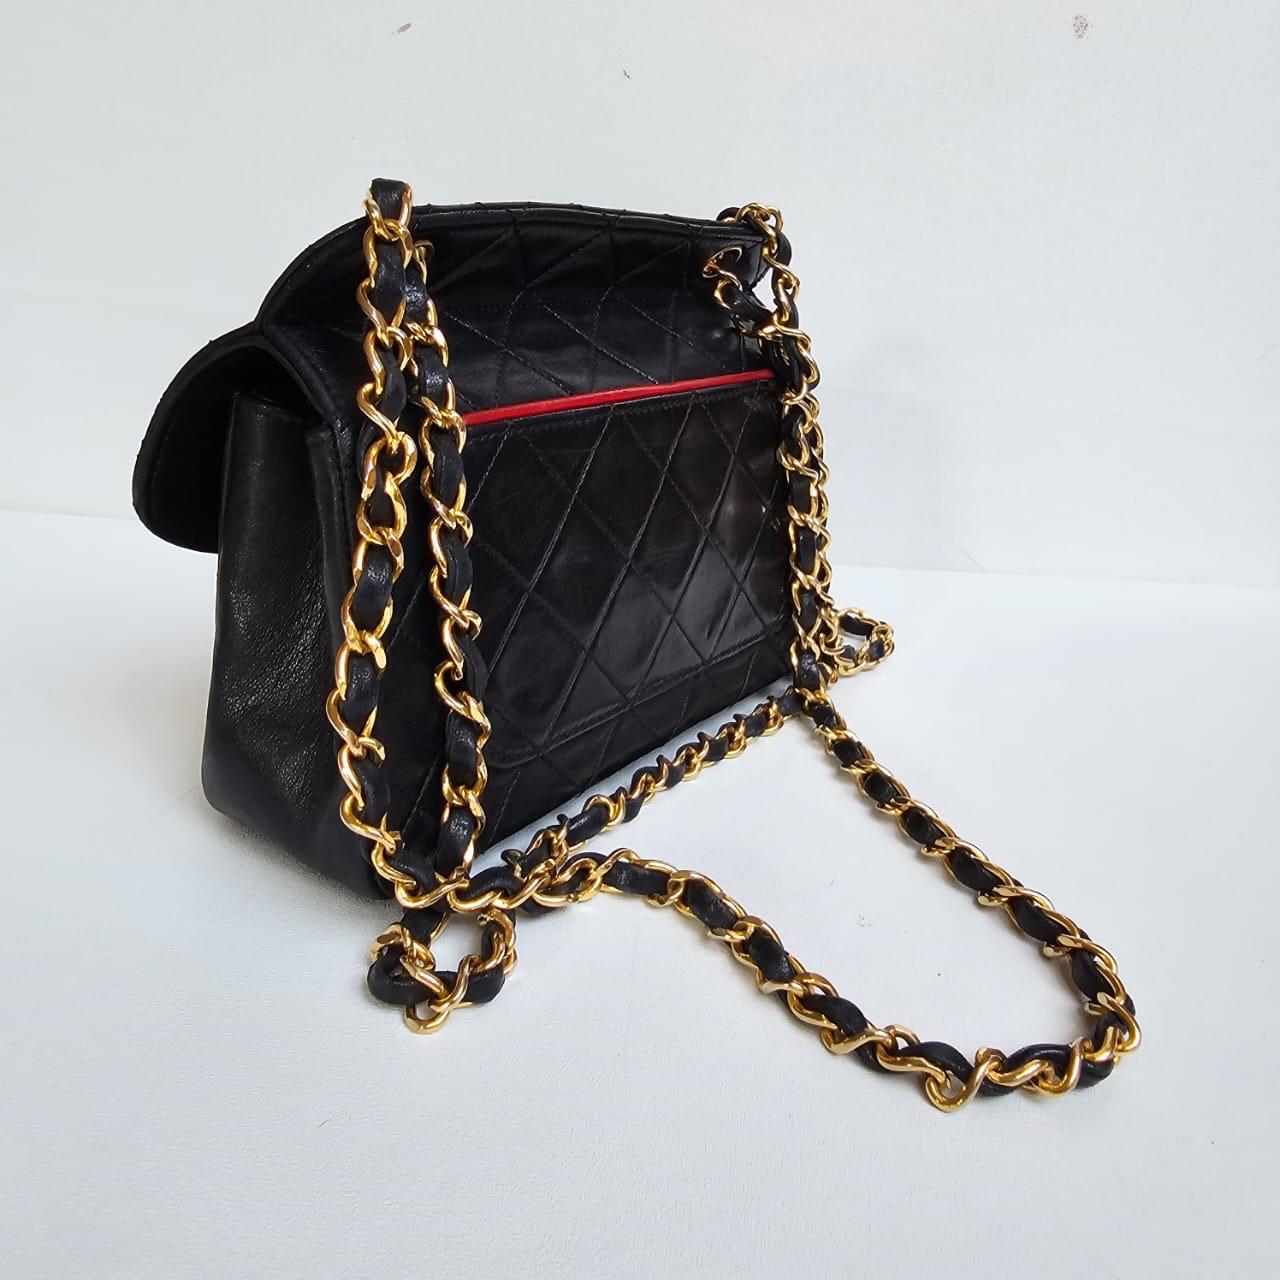 Vintage Chanel Black Lambskin Quilted Mini Flap Bag For Sale 6